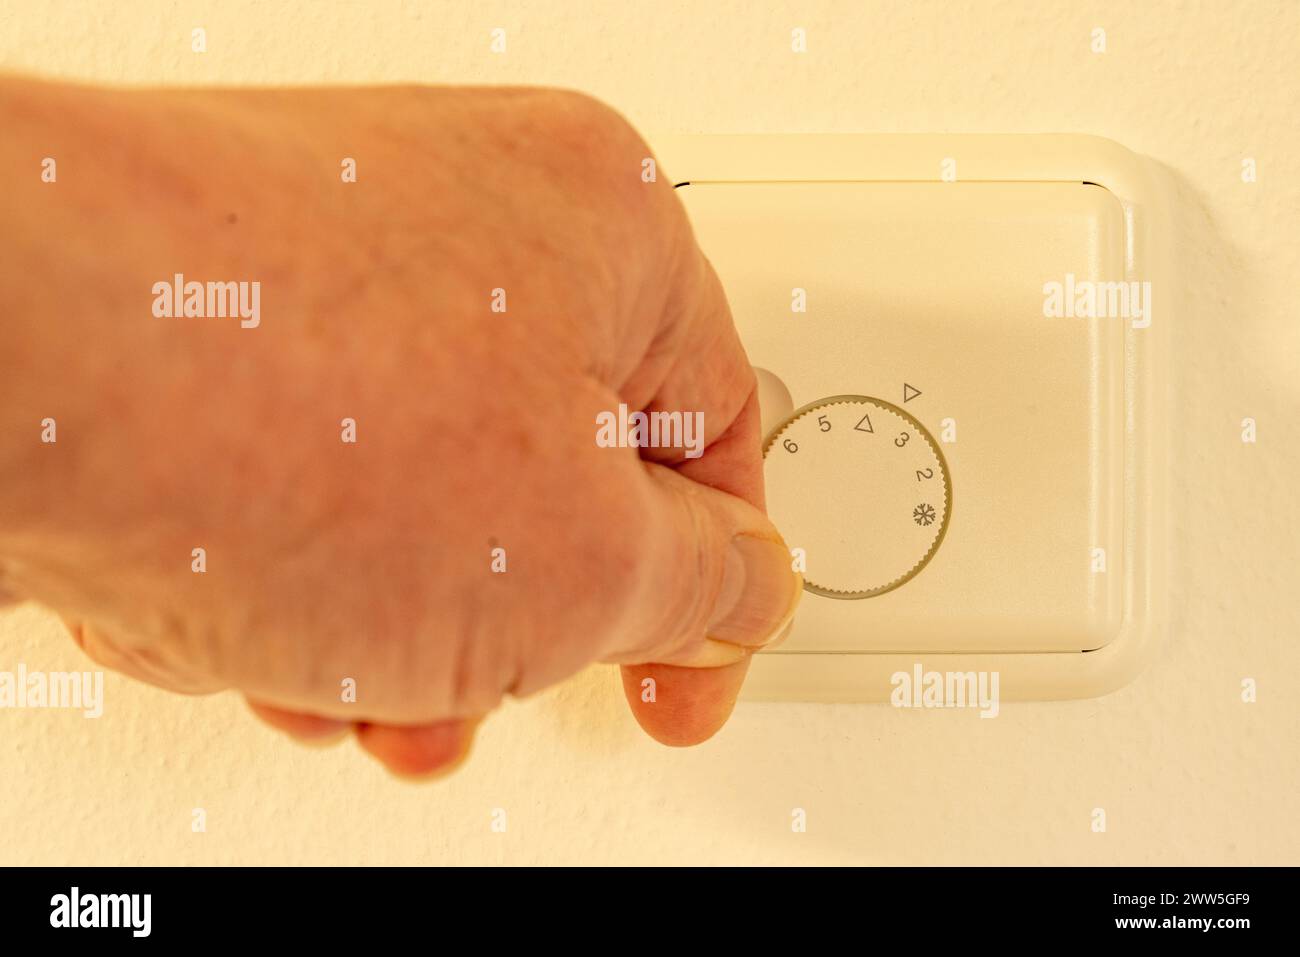 Hand changing the setting of a knob for regulating the room temperature on a white thermostat, mounted on a wall. Stock Photo